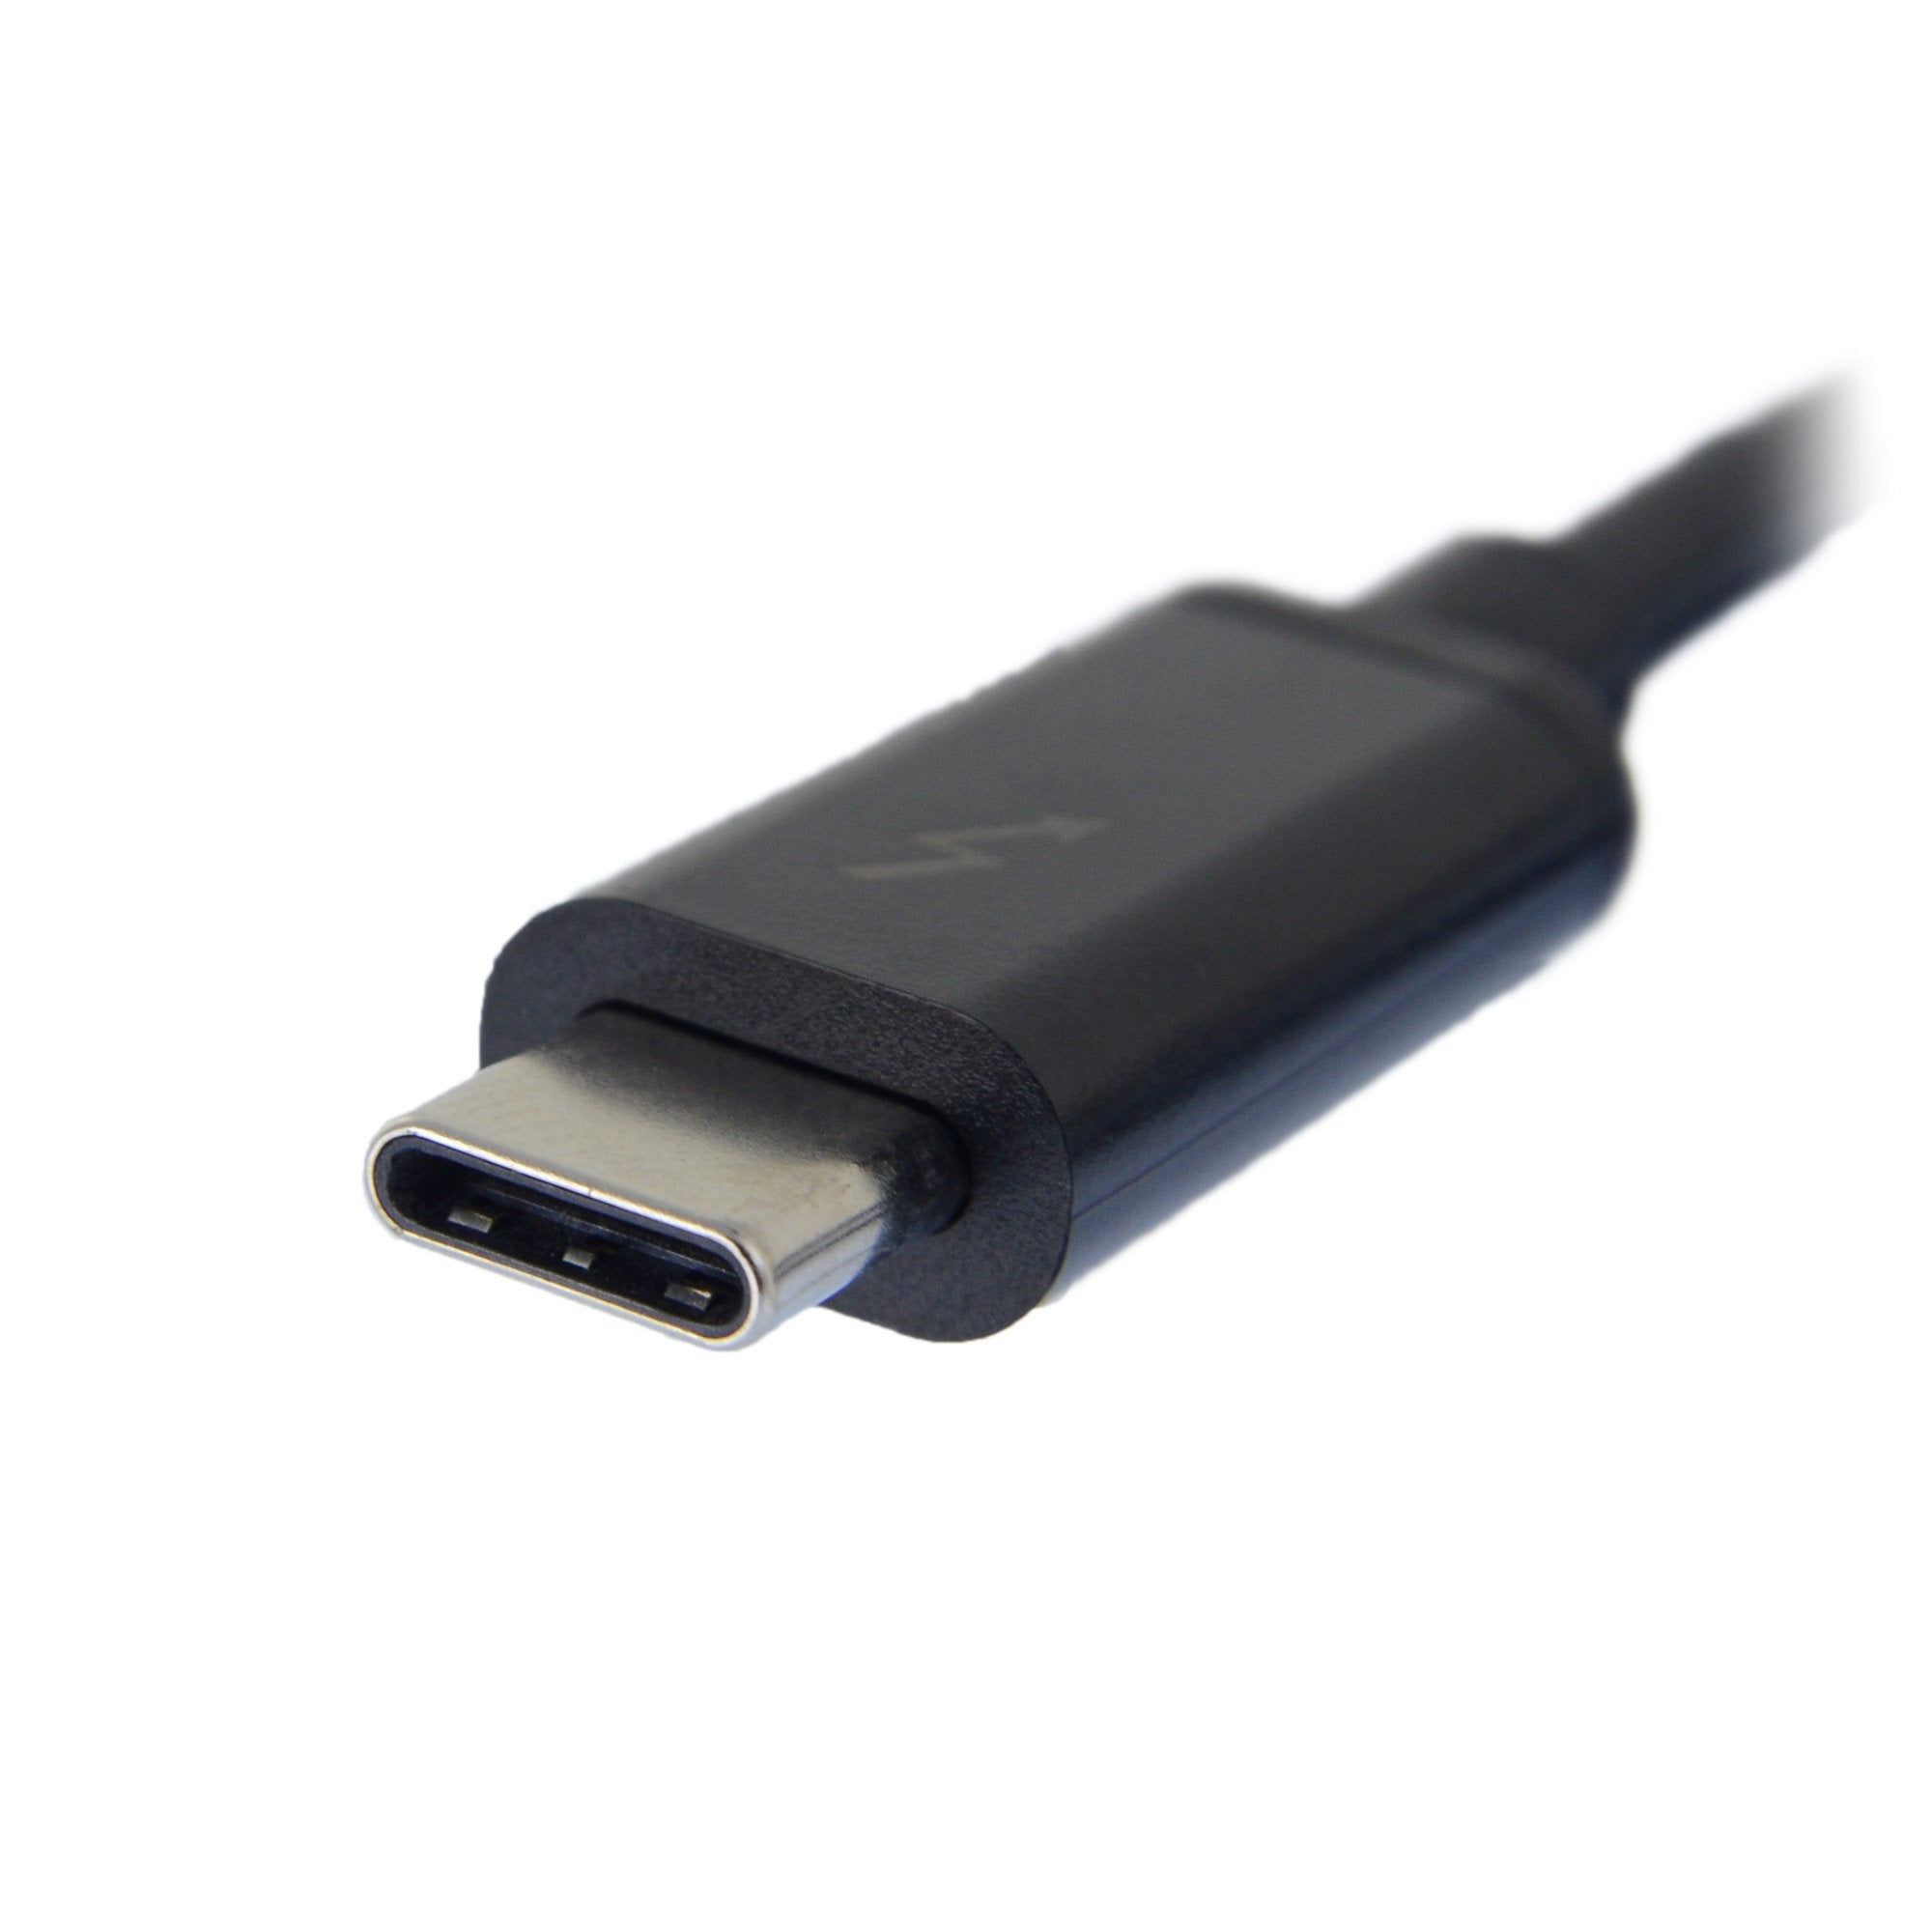 Thunderbolt 3 (USB-C) Cable .5 Meter